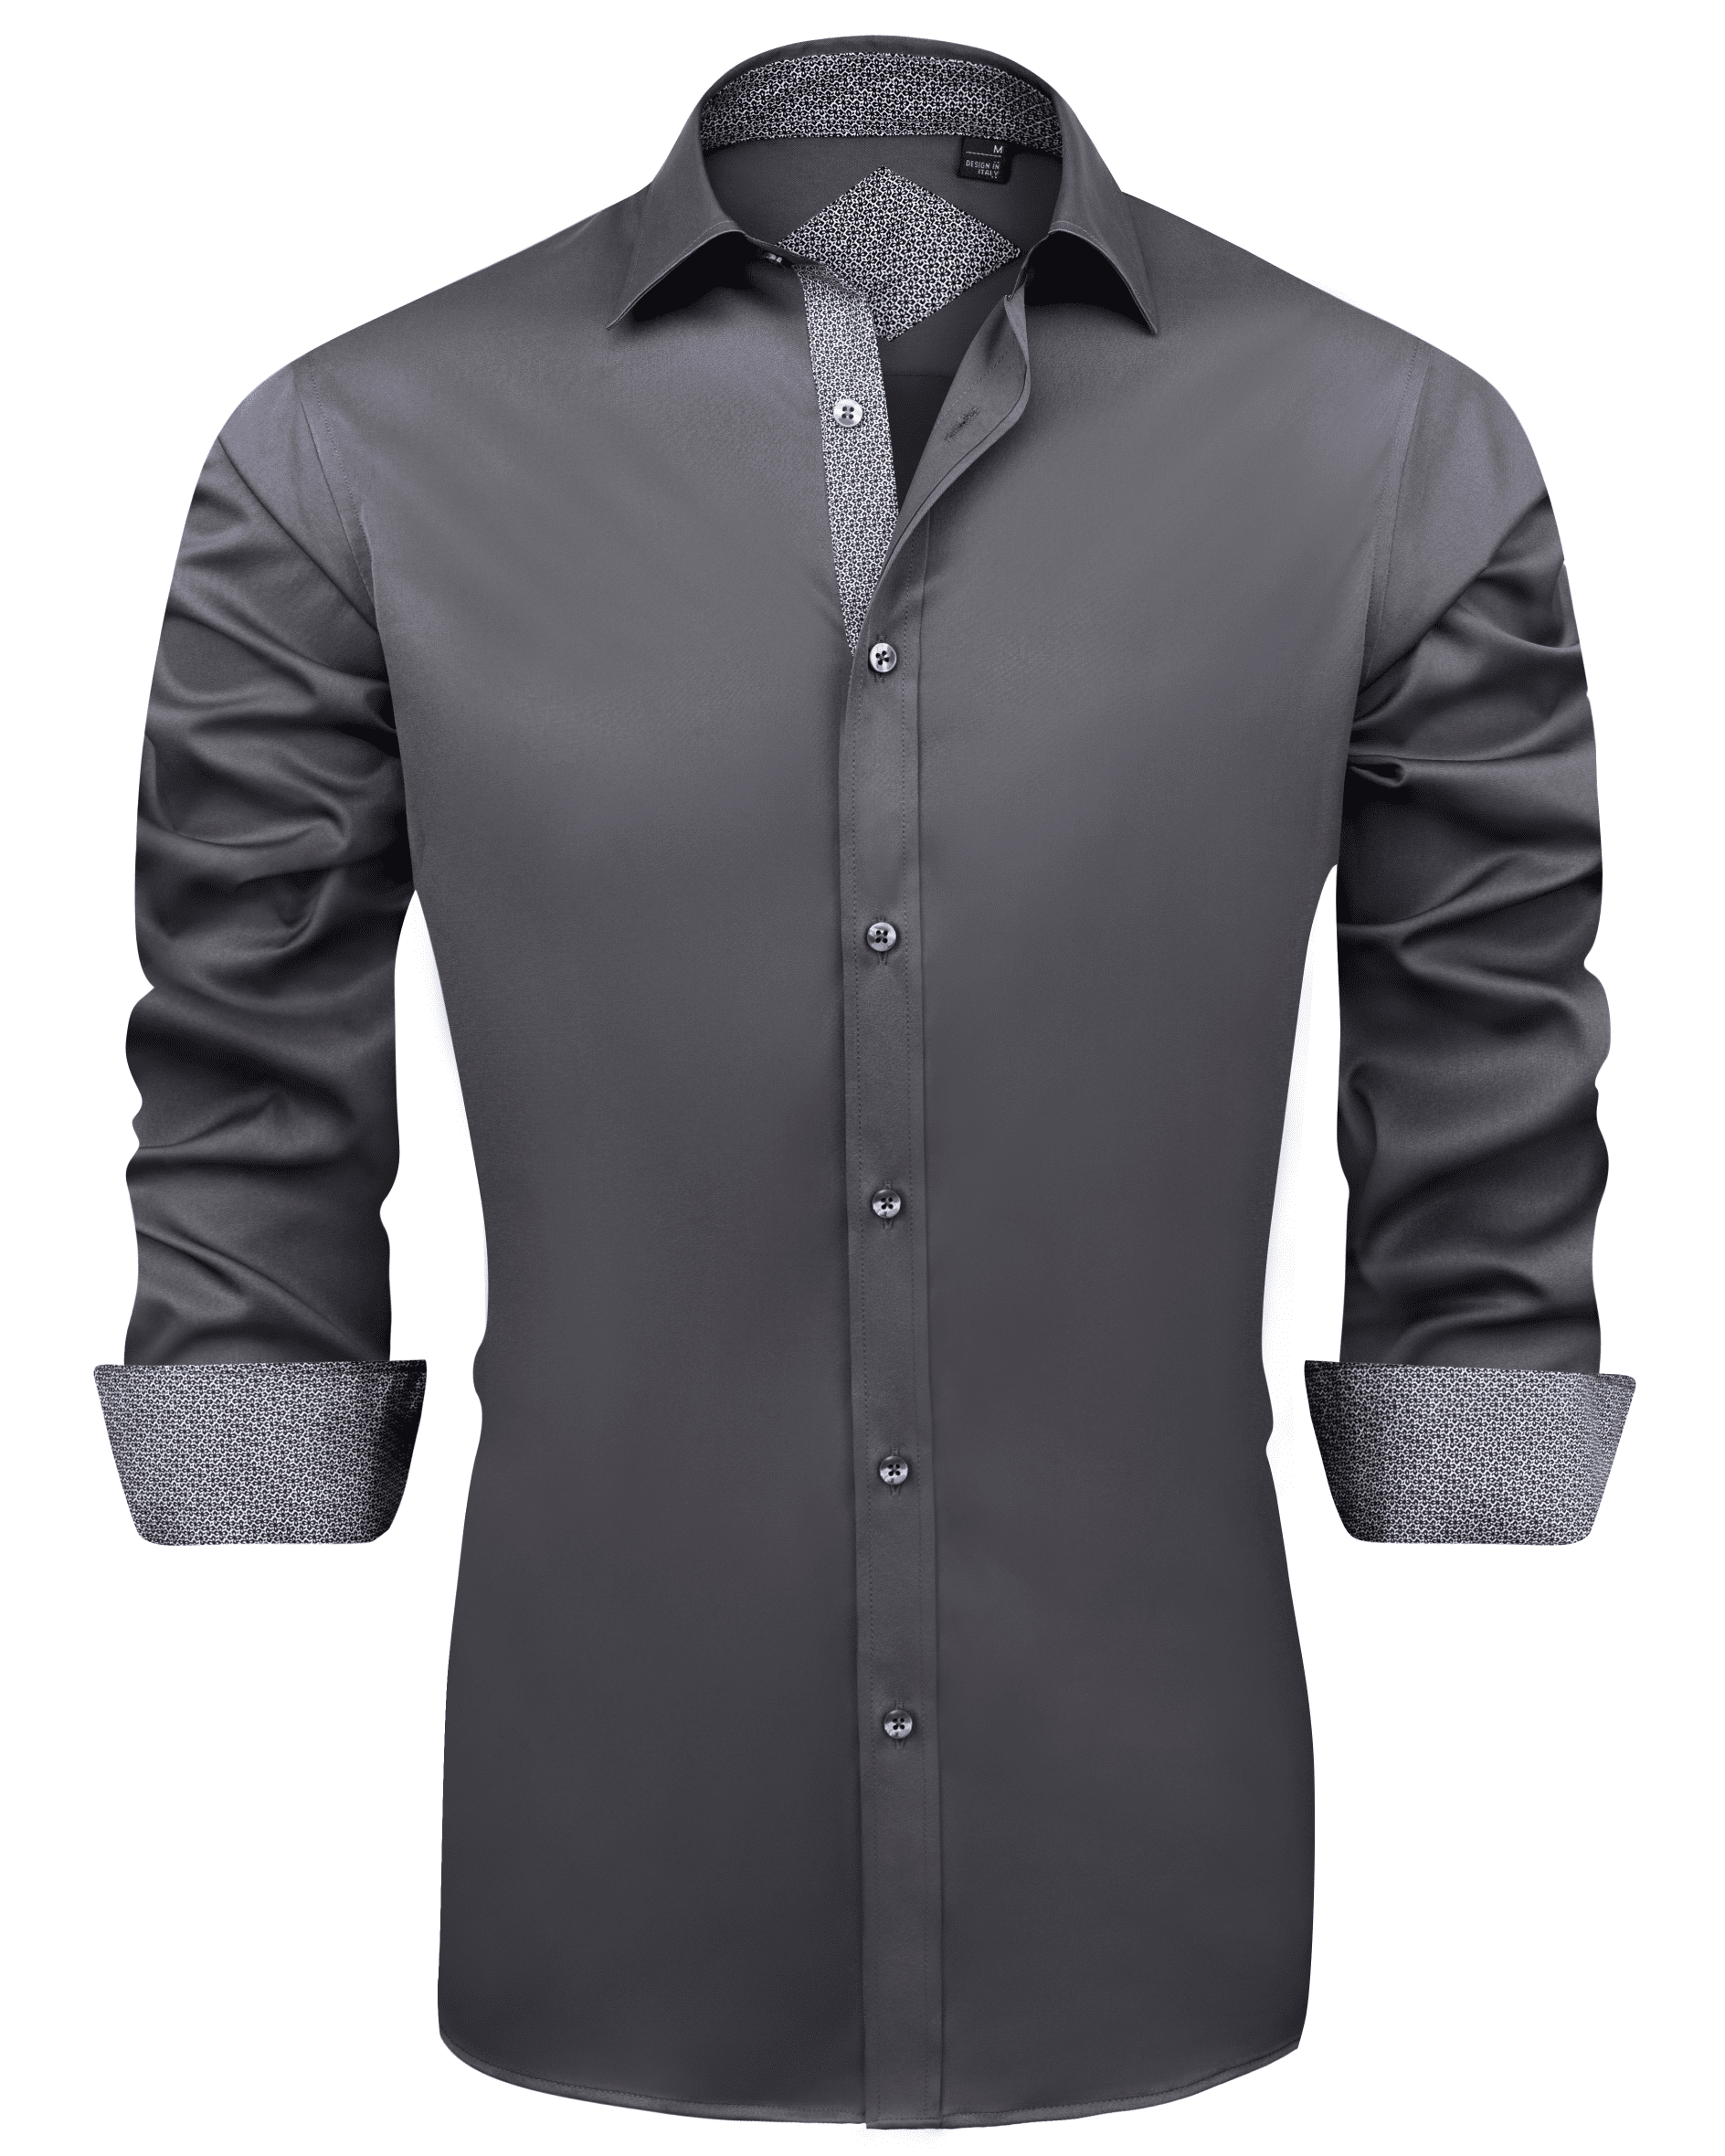 Sykooria Mens Fashion Cotton Casual Dress Shirt Button-Down Long Sleeve Collared Work Shirts for Men 